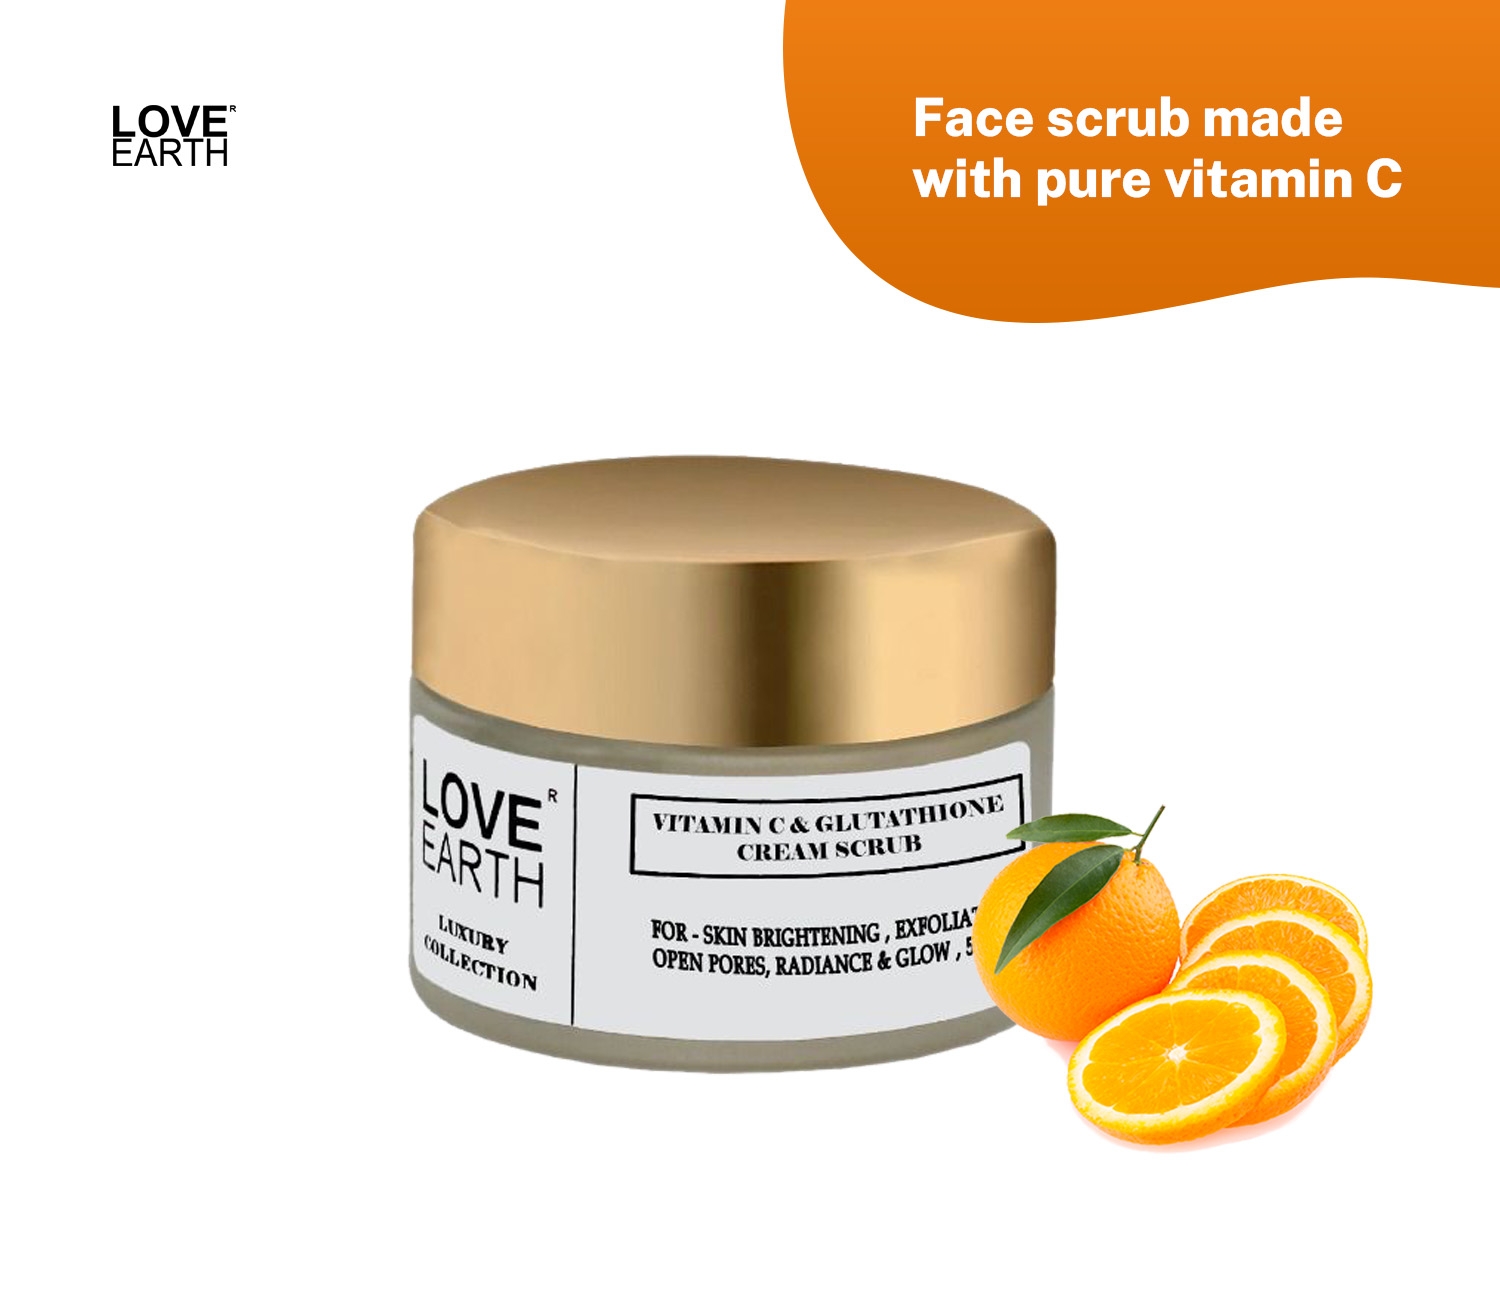 LOVE EARTH | Love Earth Vitamin C And Glutathione Face Scrub With Vitamin C & Essential Oils For Skin Exfoilation & Hydration Suitable For All Skin Types 50gm 1